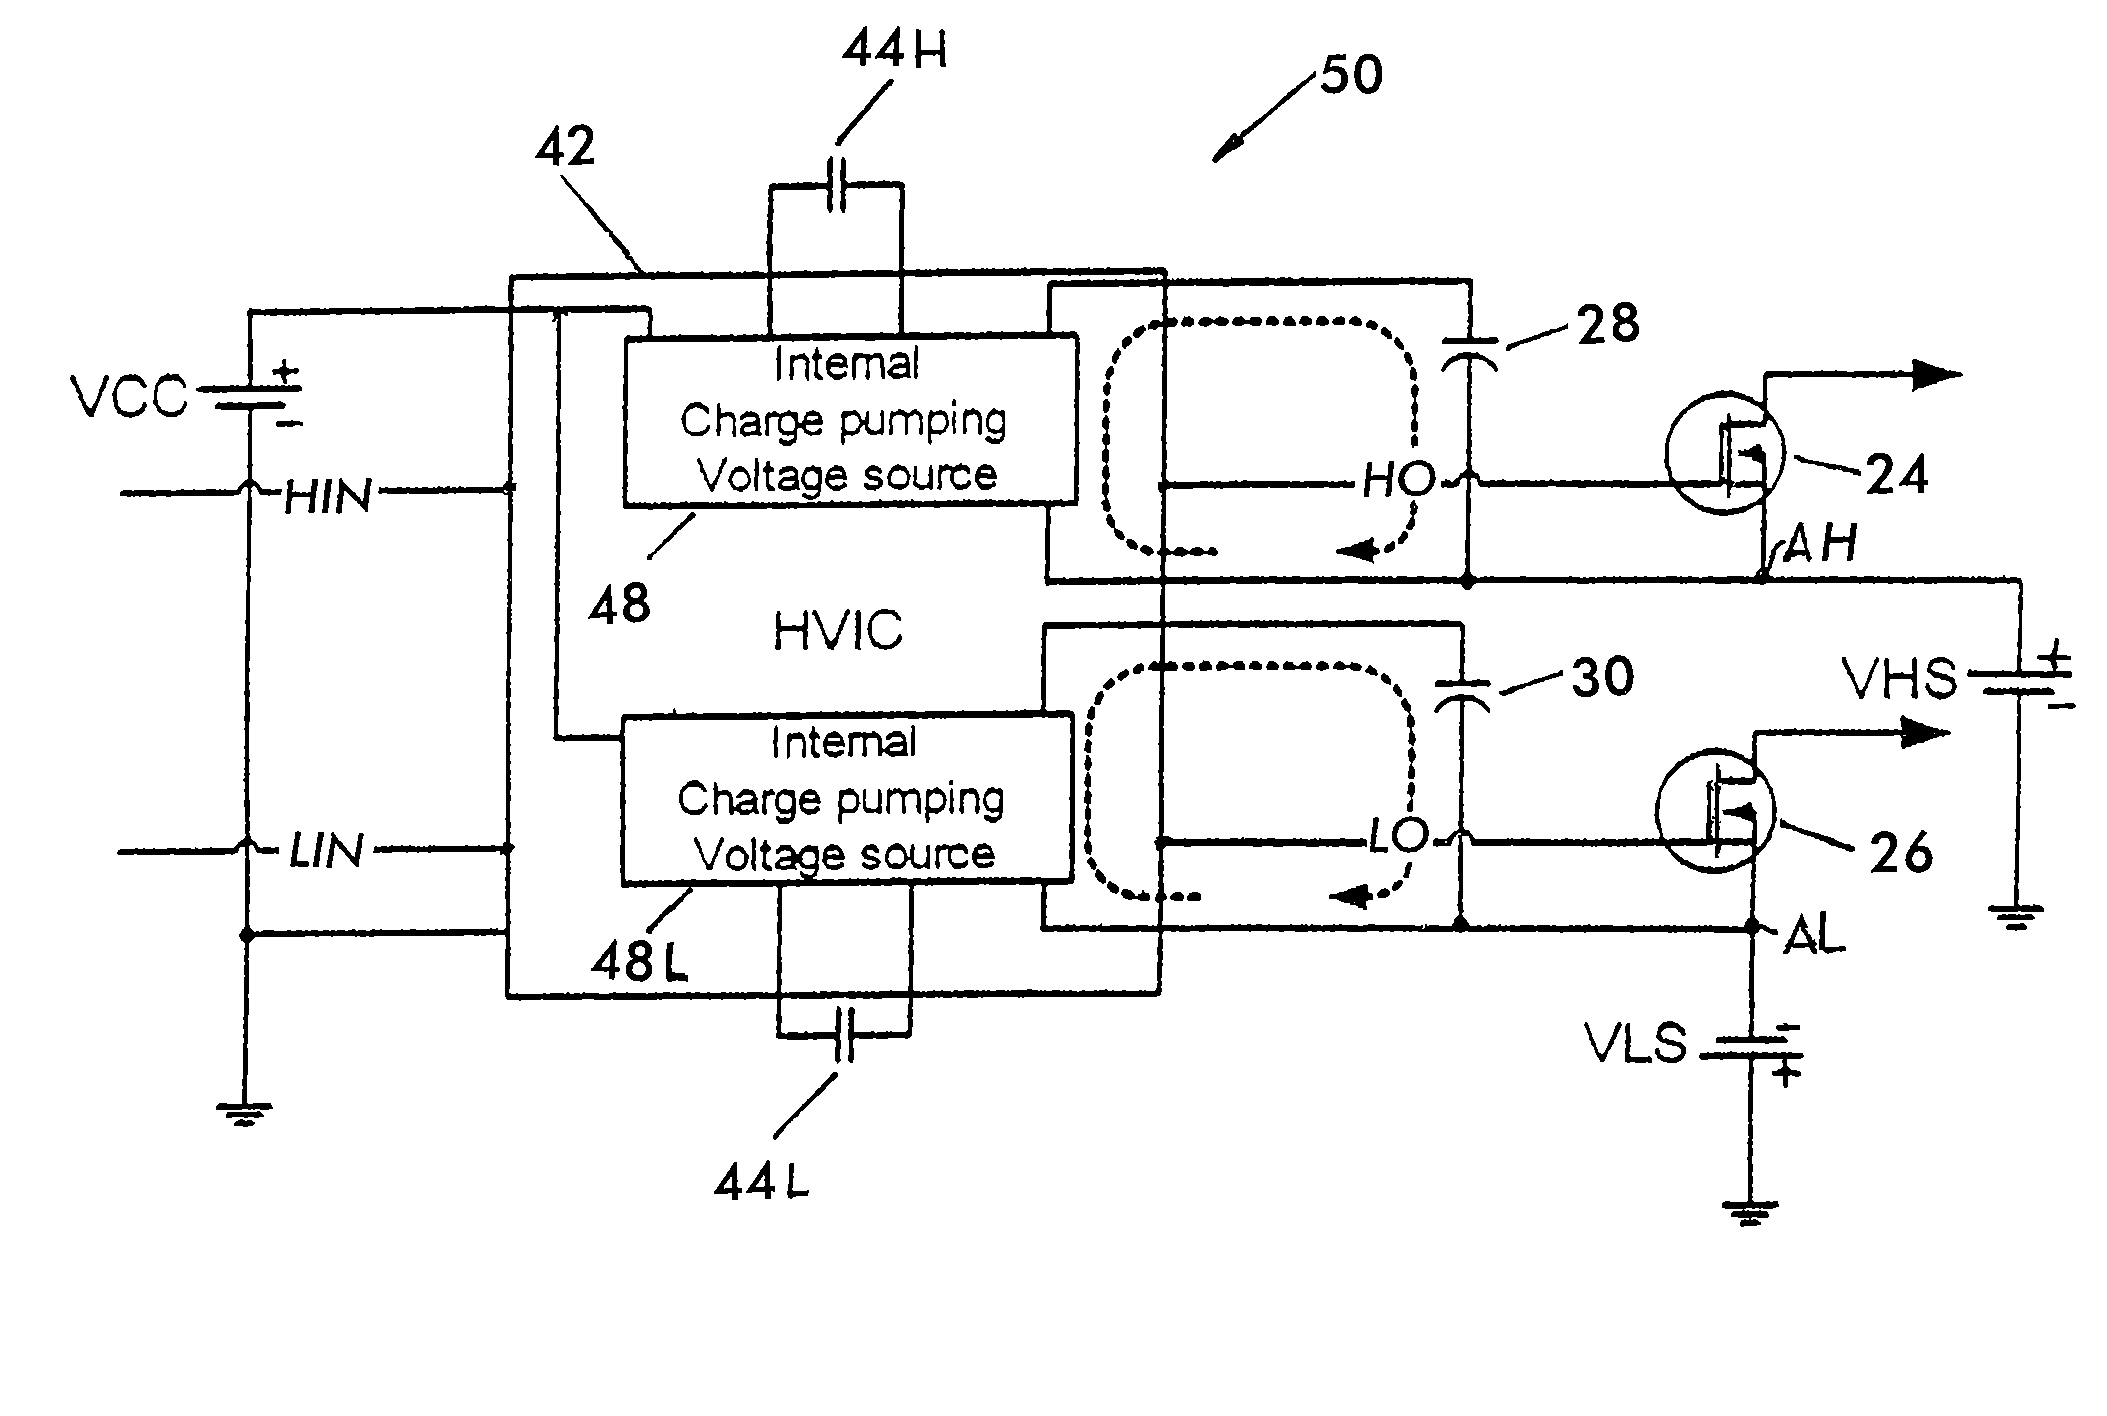 High voltage gate driver IC (HVIC) with internal charge pumping voltage source